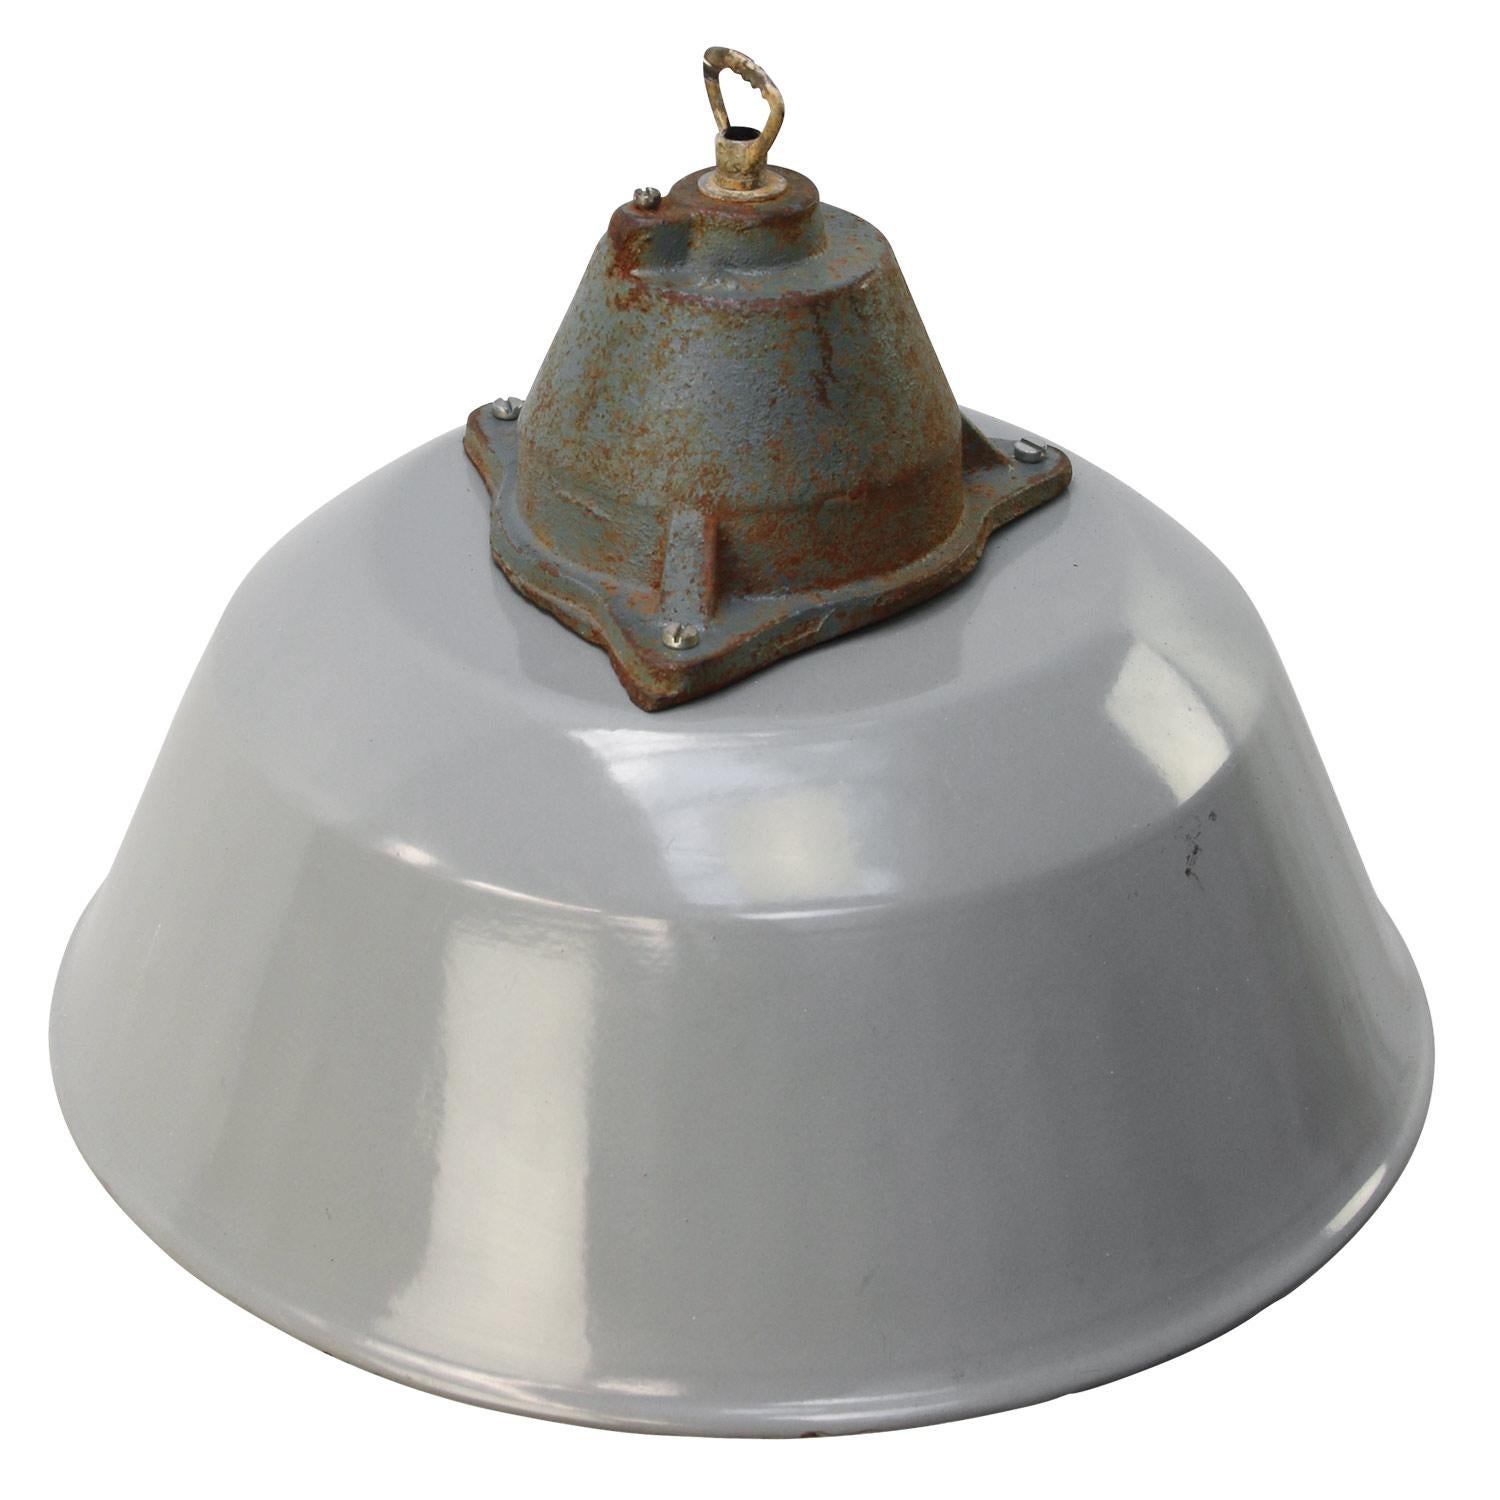 Factory pendant. Gray enamel white interior. Cast iron top with clear glass.

Measures: Weight 3.4 kg / 7.5 lb

Priced per individual item. All lamps have been made suitable by international standards for incandescent light bulbs,